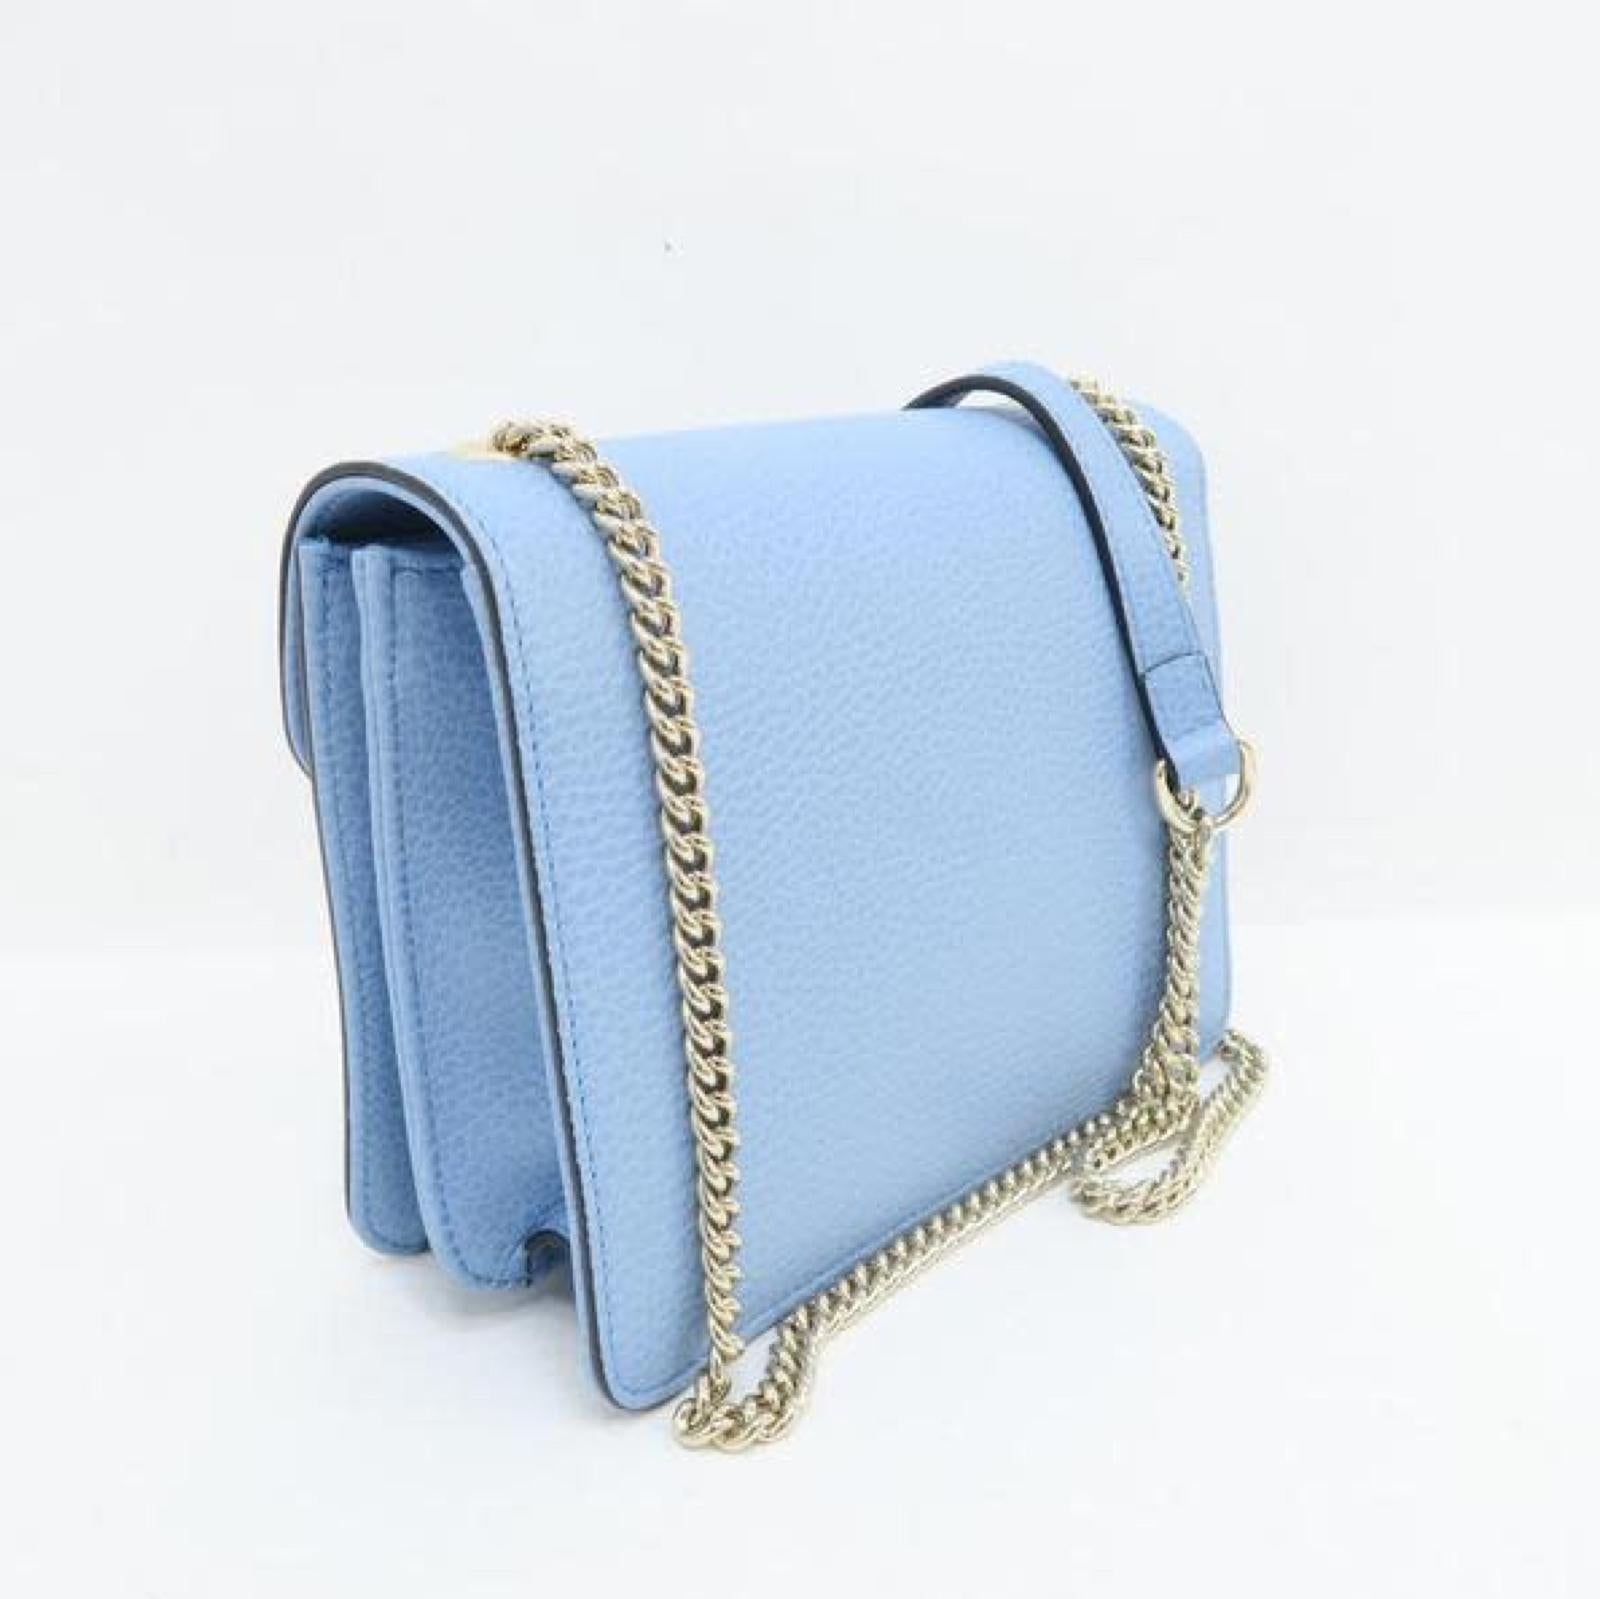 This shoulder bag features a leather body, a chain-link shoulder strap with leather shoulder guard and a front flap with gold-tone interlocking GG flip-lock closure.

COLOR: Baby blue
MATERIAL: Leather
ITEM CODE: 510304 G6268L
MEASURES: H 5.75